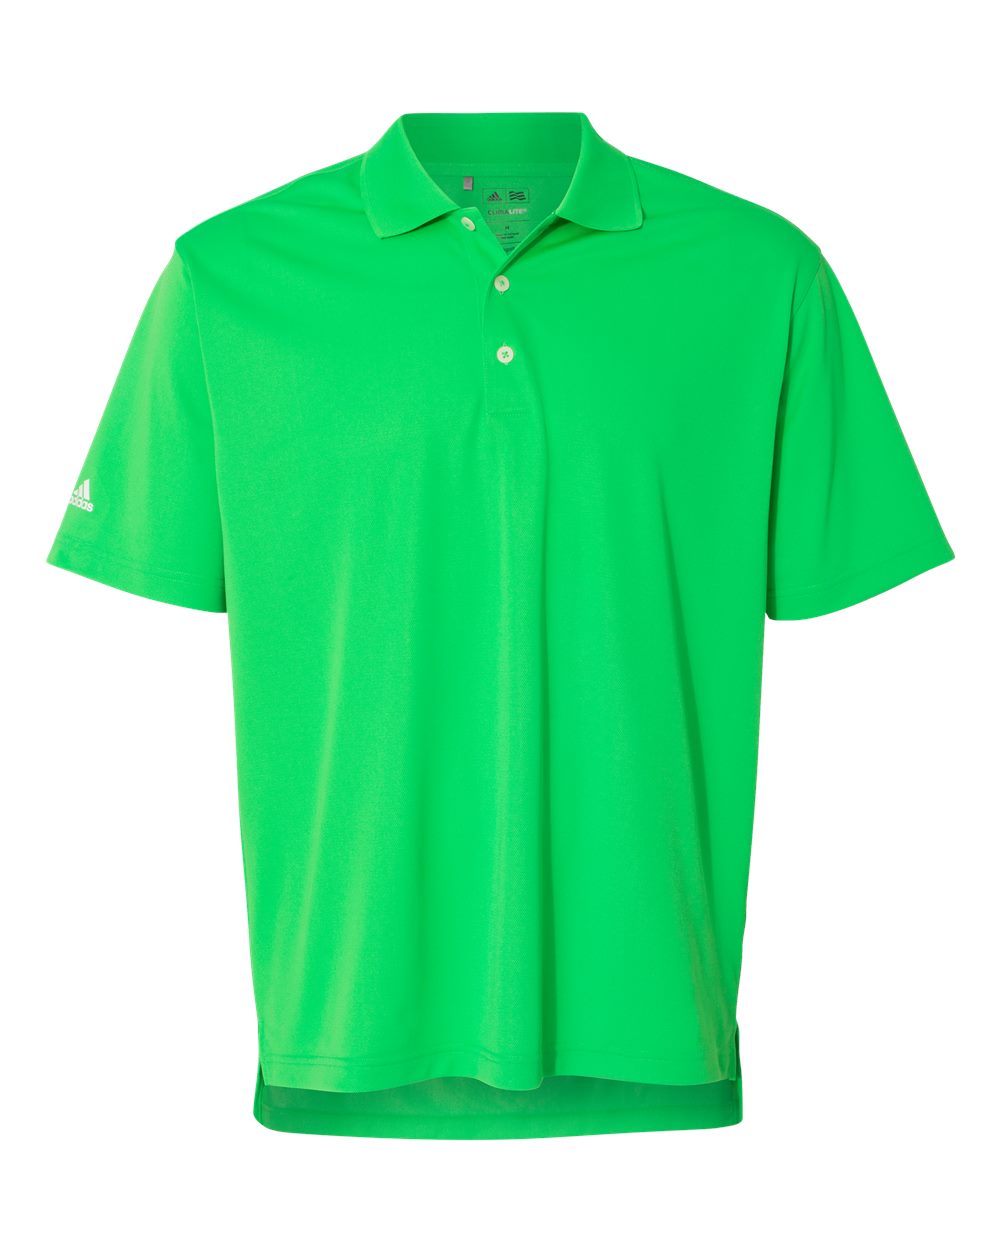 adidas men's climalite grind polo